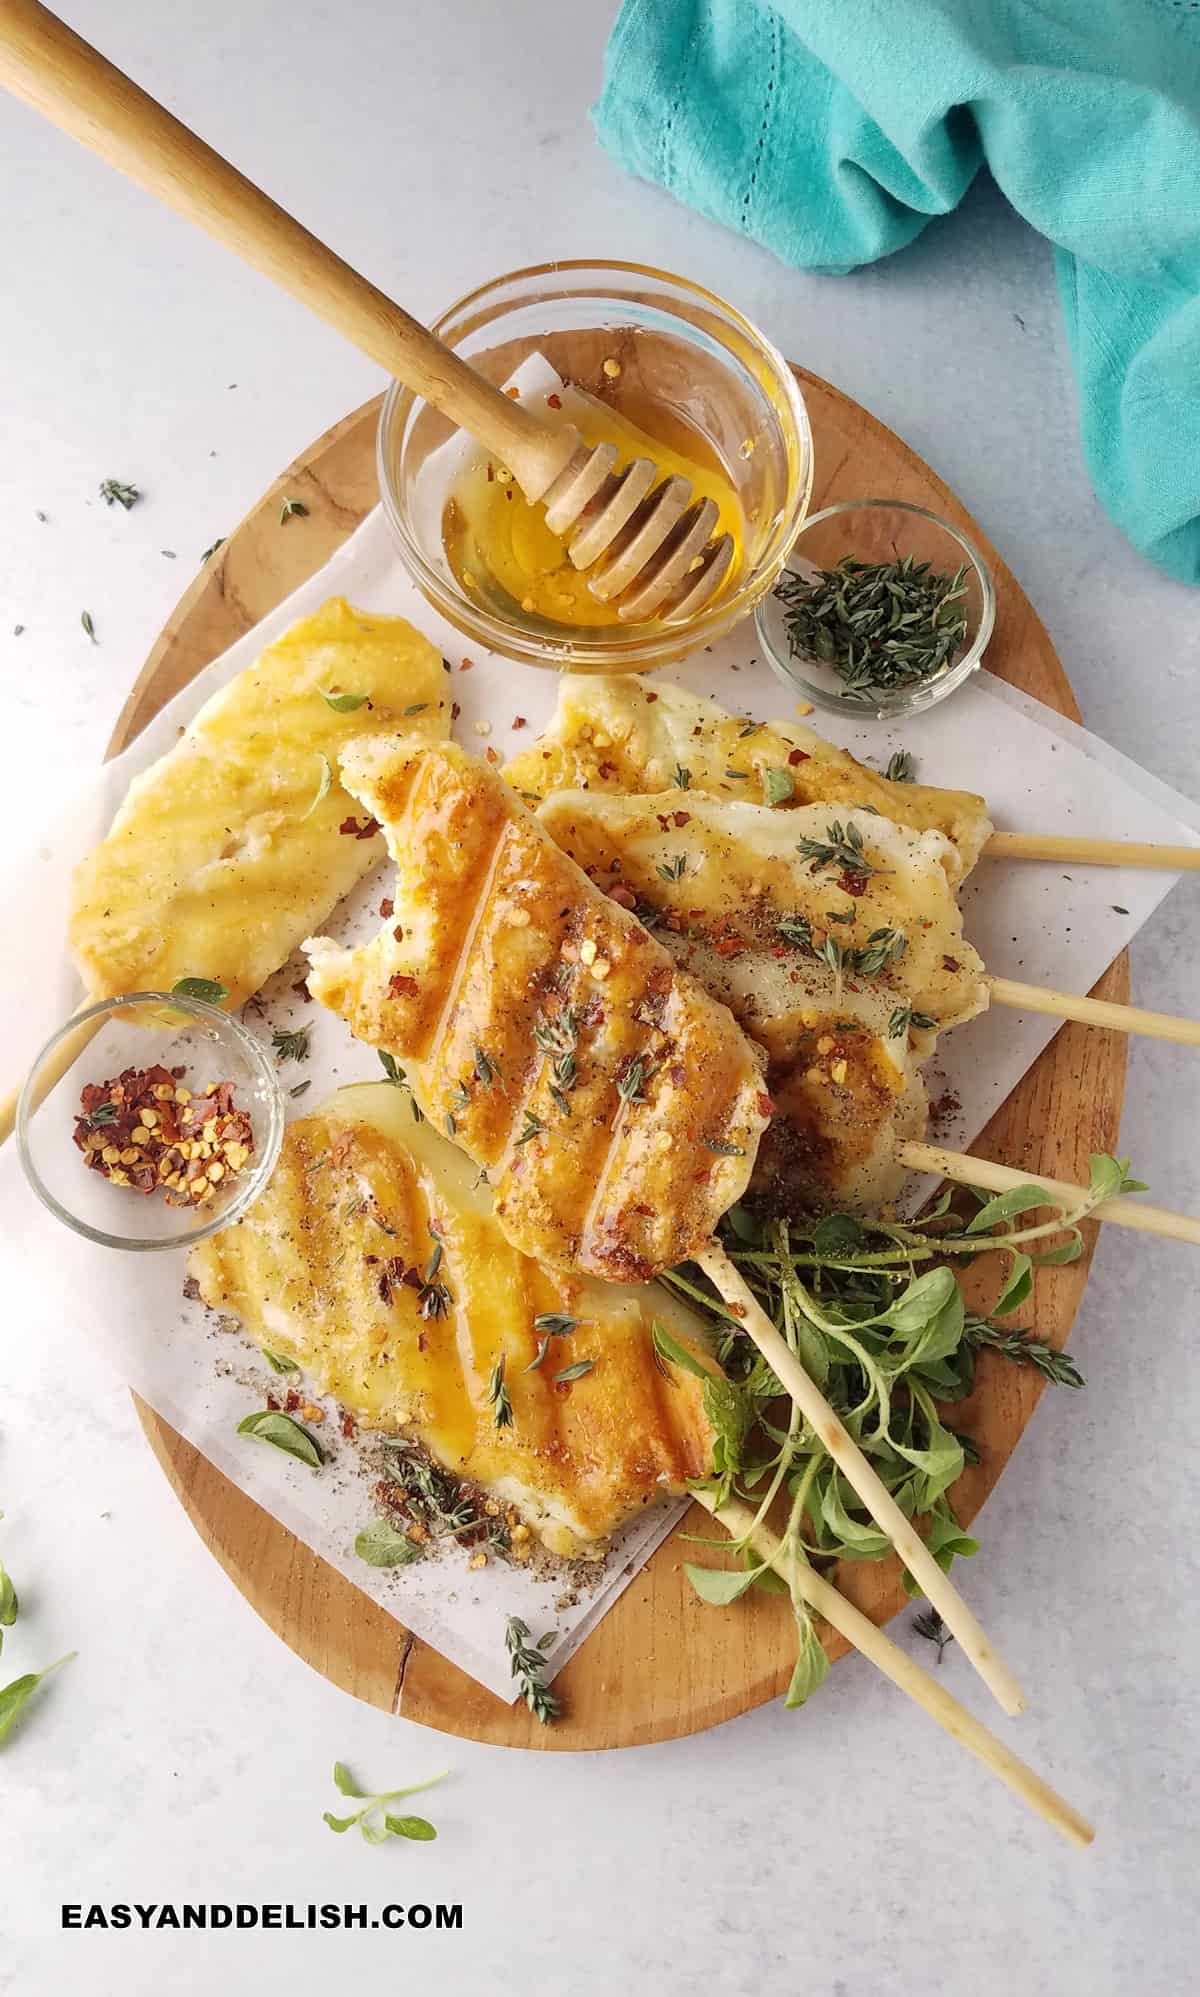 a tray with sticks of grilling cheeses a dn some garnishes on the side, made with halloumi.